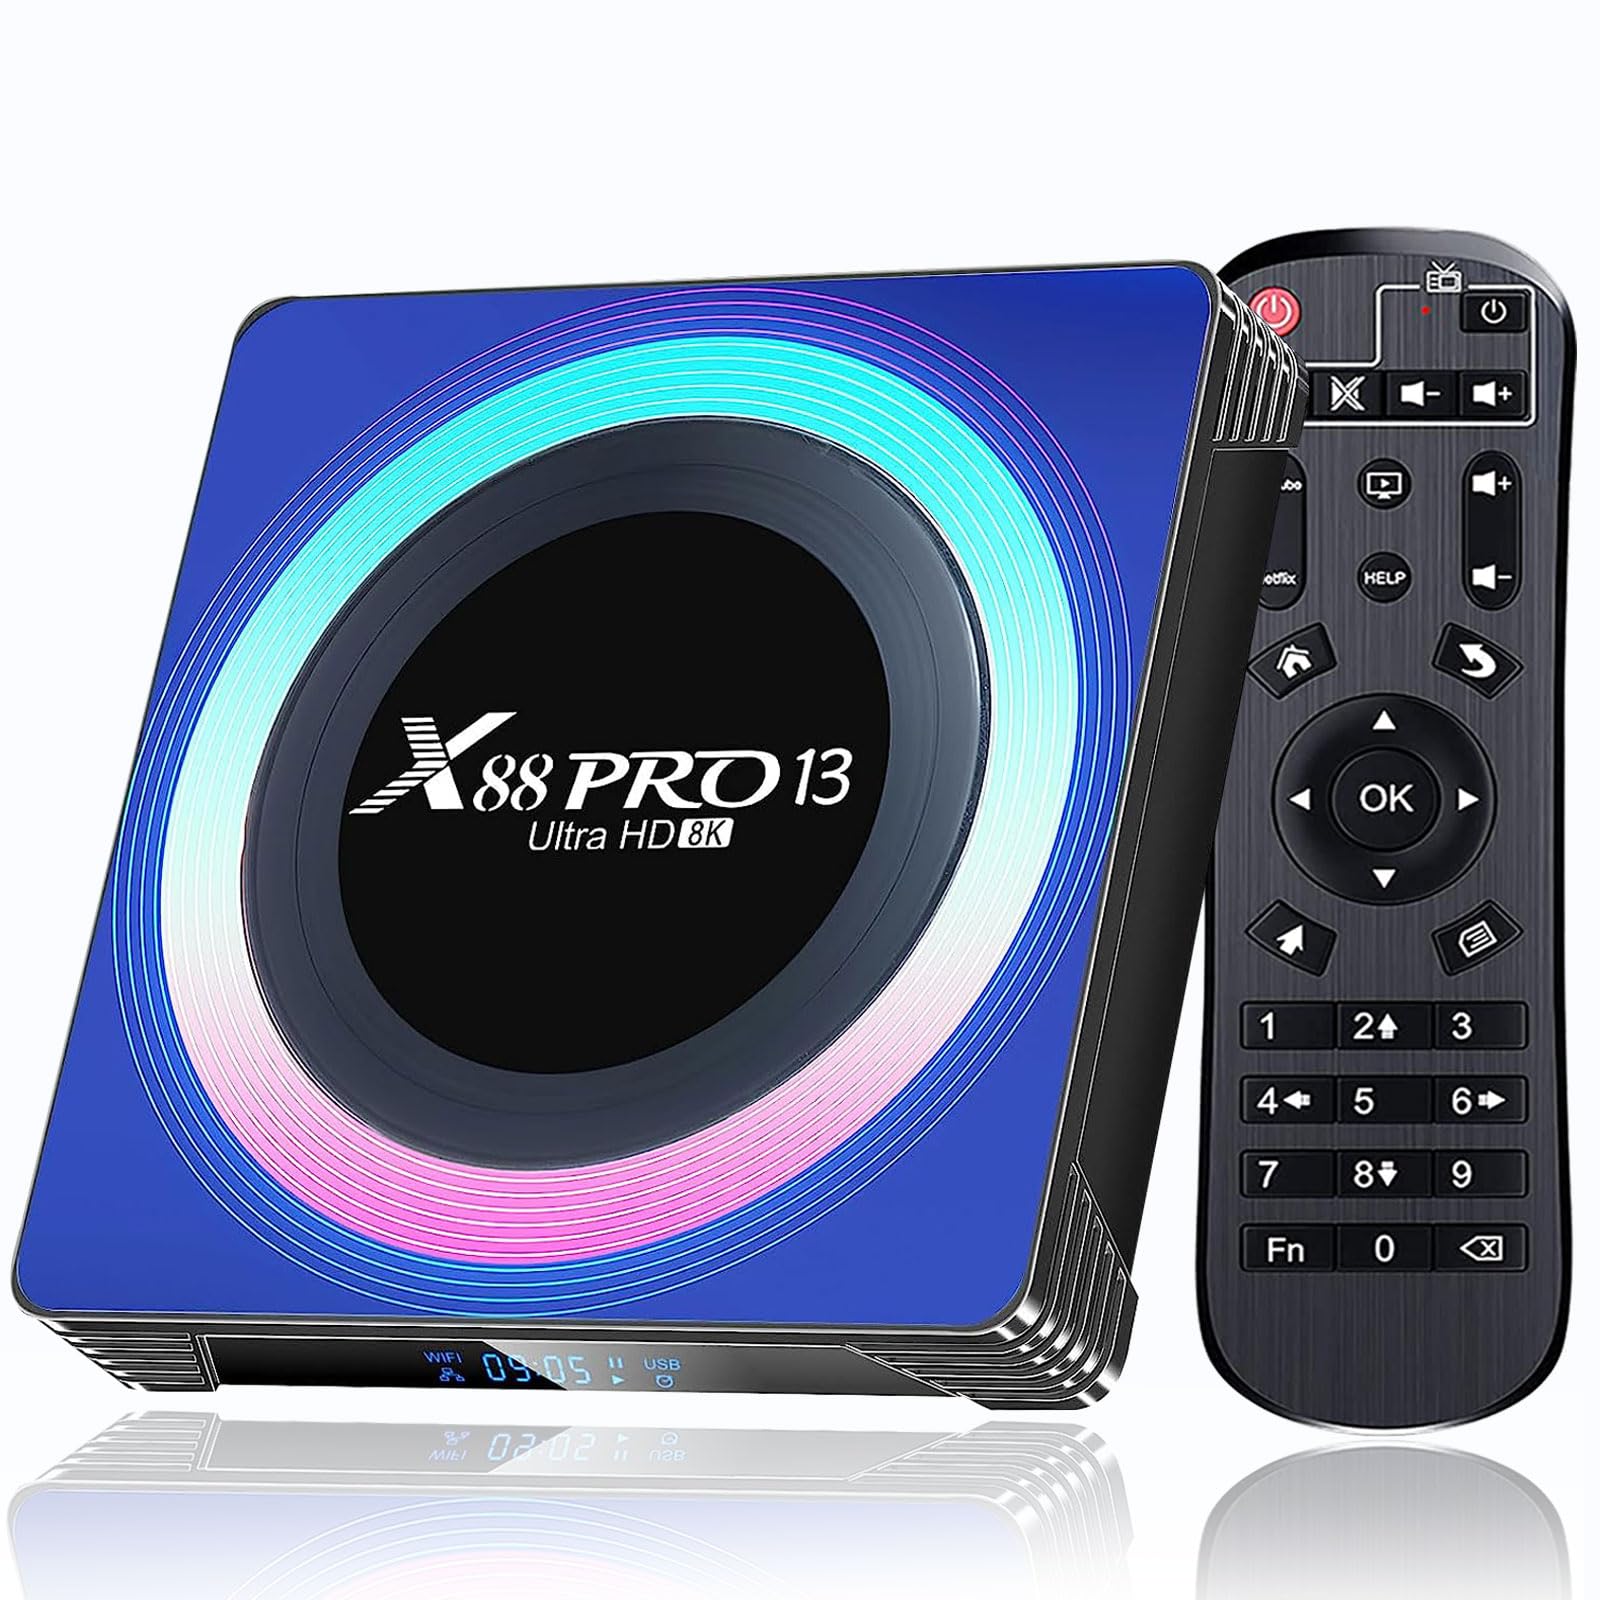 EASYTONE Android TV Box 13.0 X88 Pro-13 Android 13 TV Box 4GB RAM 32GB ROM,WiFi 6 8K/6K TV Box Android RK3528 Quad-Core 2.4/5.8GHz WiFi Bluetooth 5.0 USB 3.0 Android Box Smart TV Box【2023 Newest】